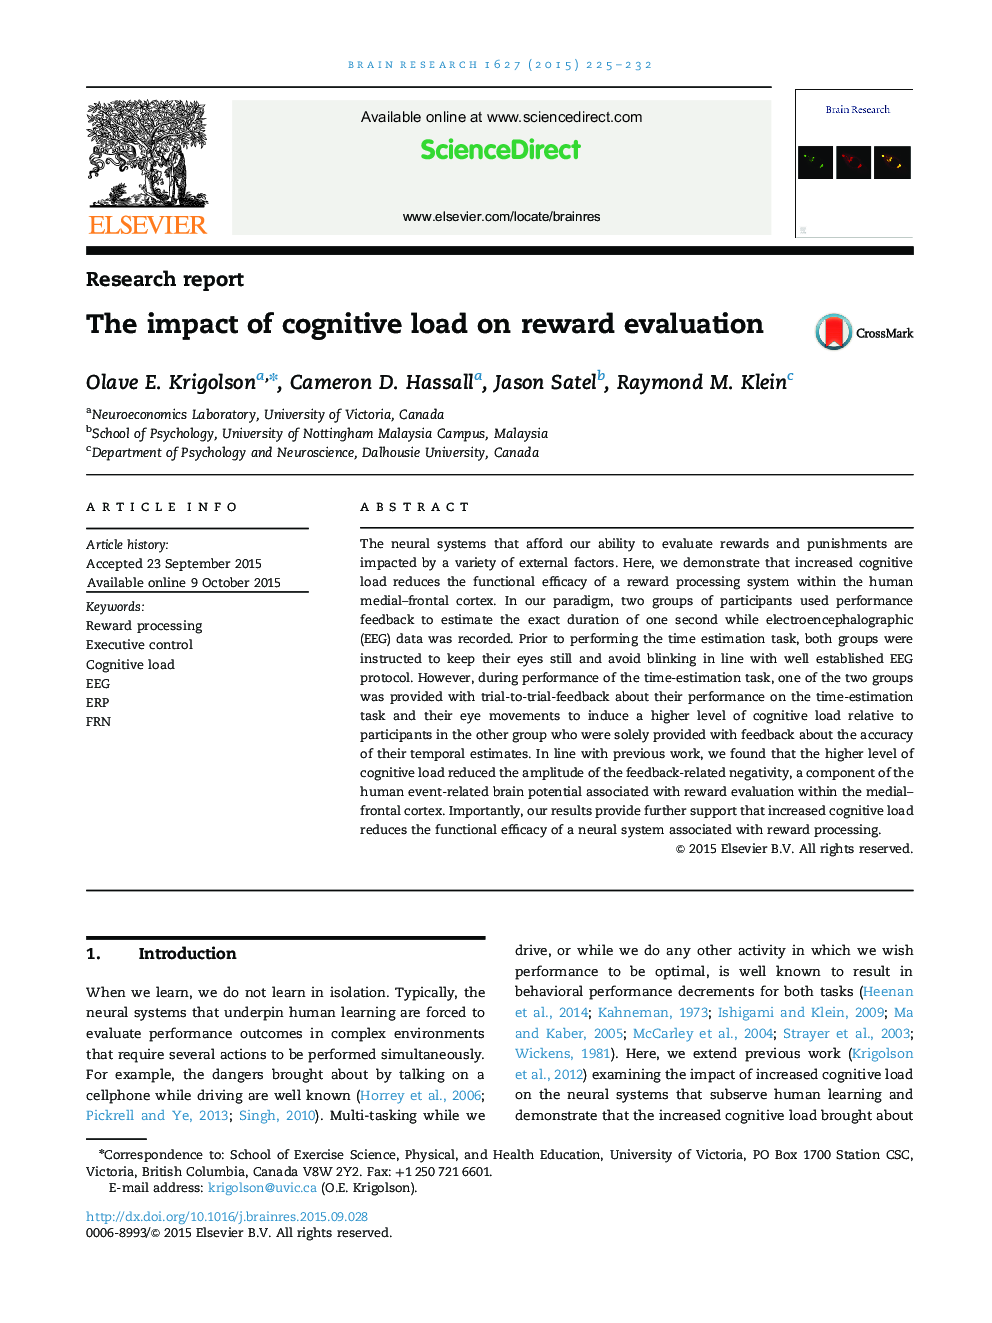 The impact of cognitive load on reward evaluation